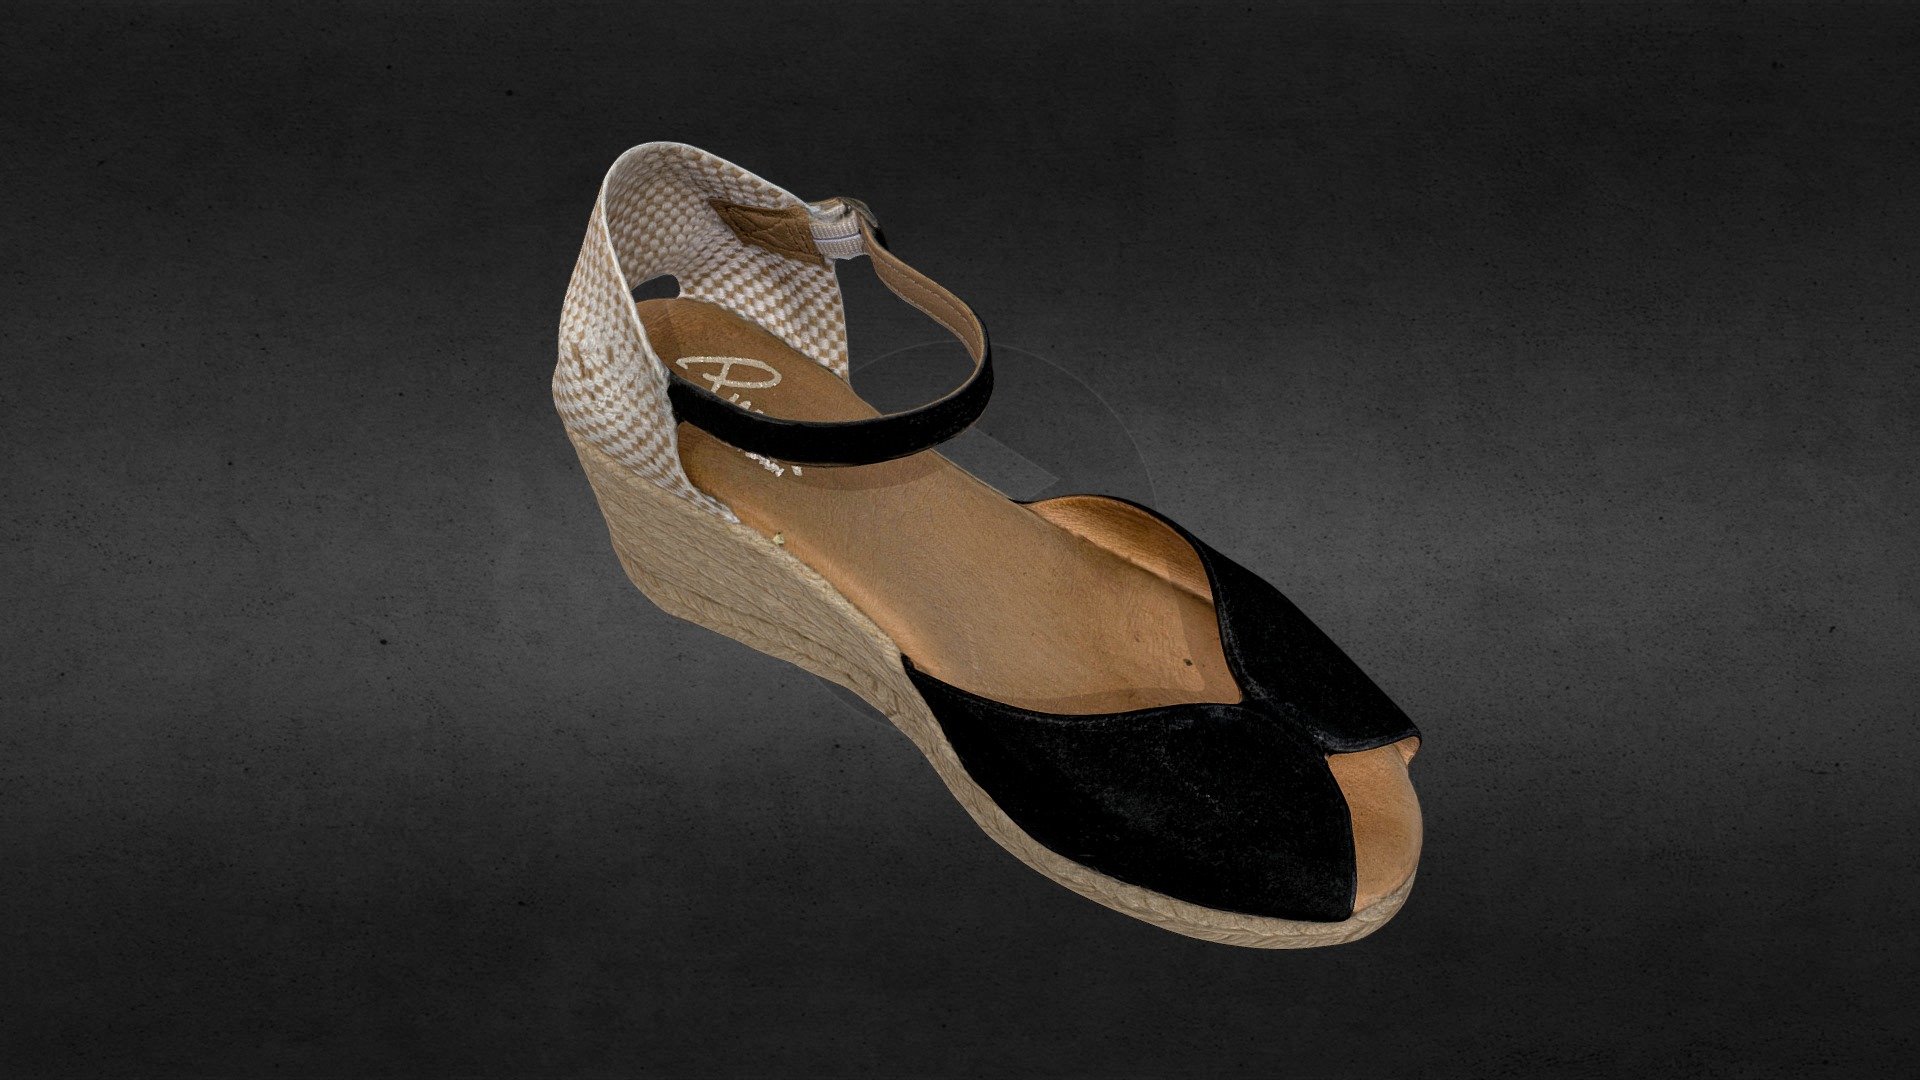 Espadrilles  are casual, rope-soled, flat but sometimes high-heeled shoes. They usually have a canvas or cotton fabric upper and a flexible sole made of esparto rope. The esparto rope sole is the defining characteristic of an espadrille; the uppers vary widely in style.
wikipedia - Espadrillas female - Buy Royalty Free 3D model by Franko (@franko_frullo) 3d model